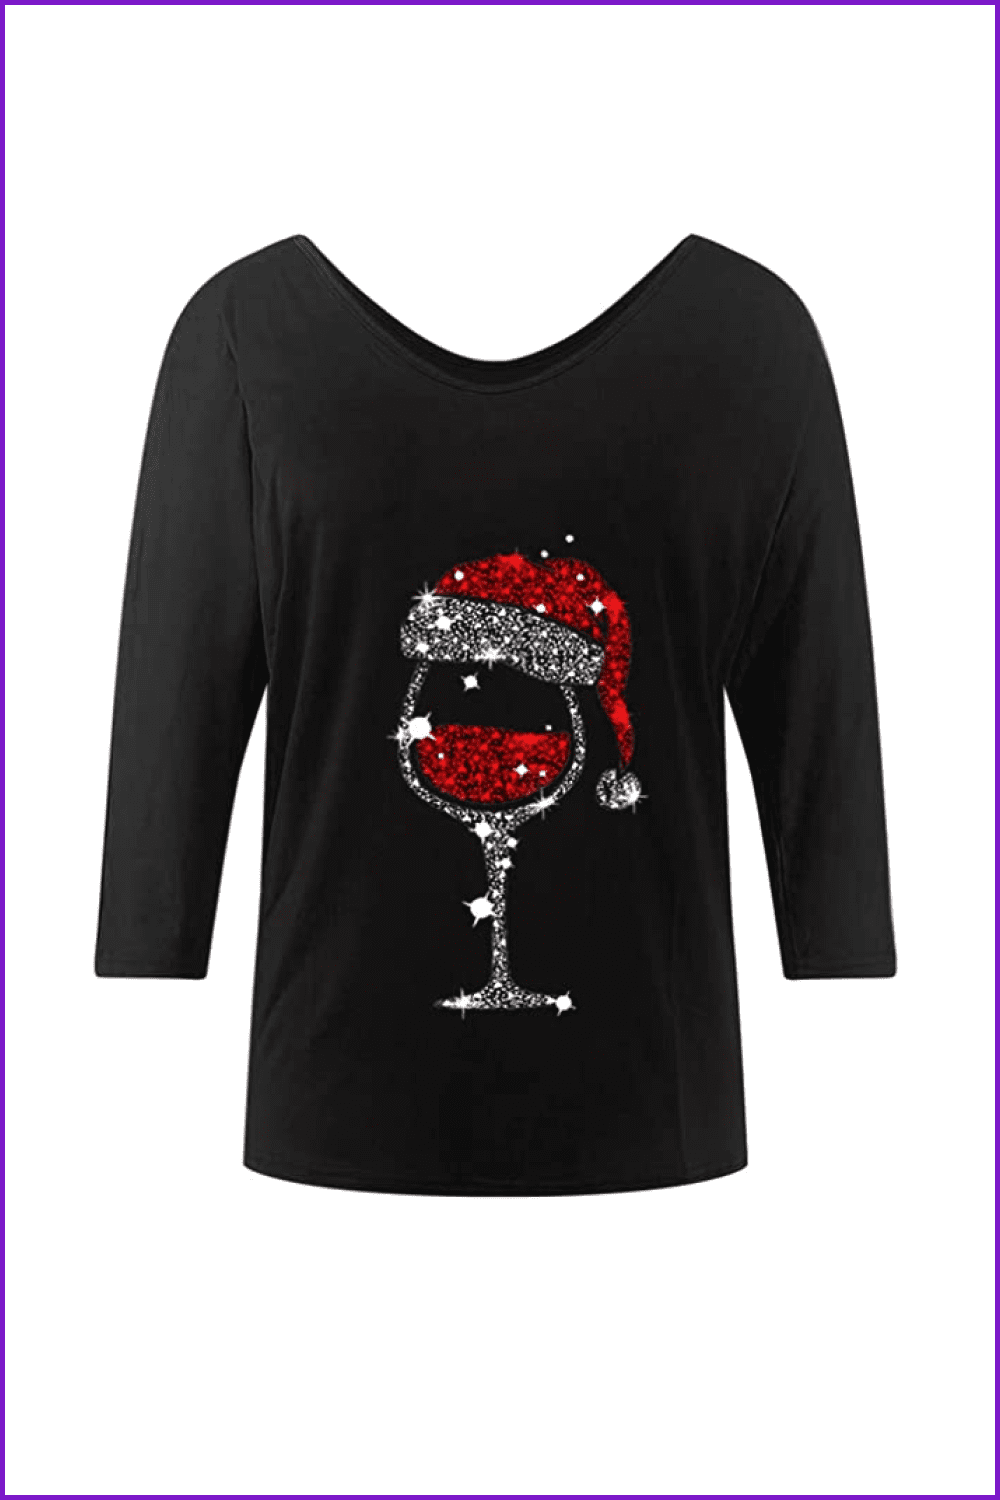 Black t-shirt with a glass of wine in the red hat.